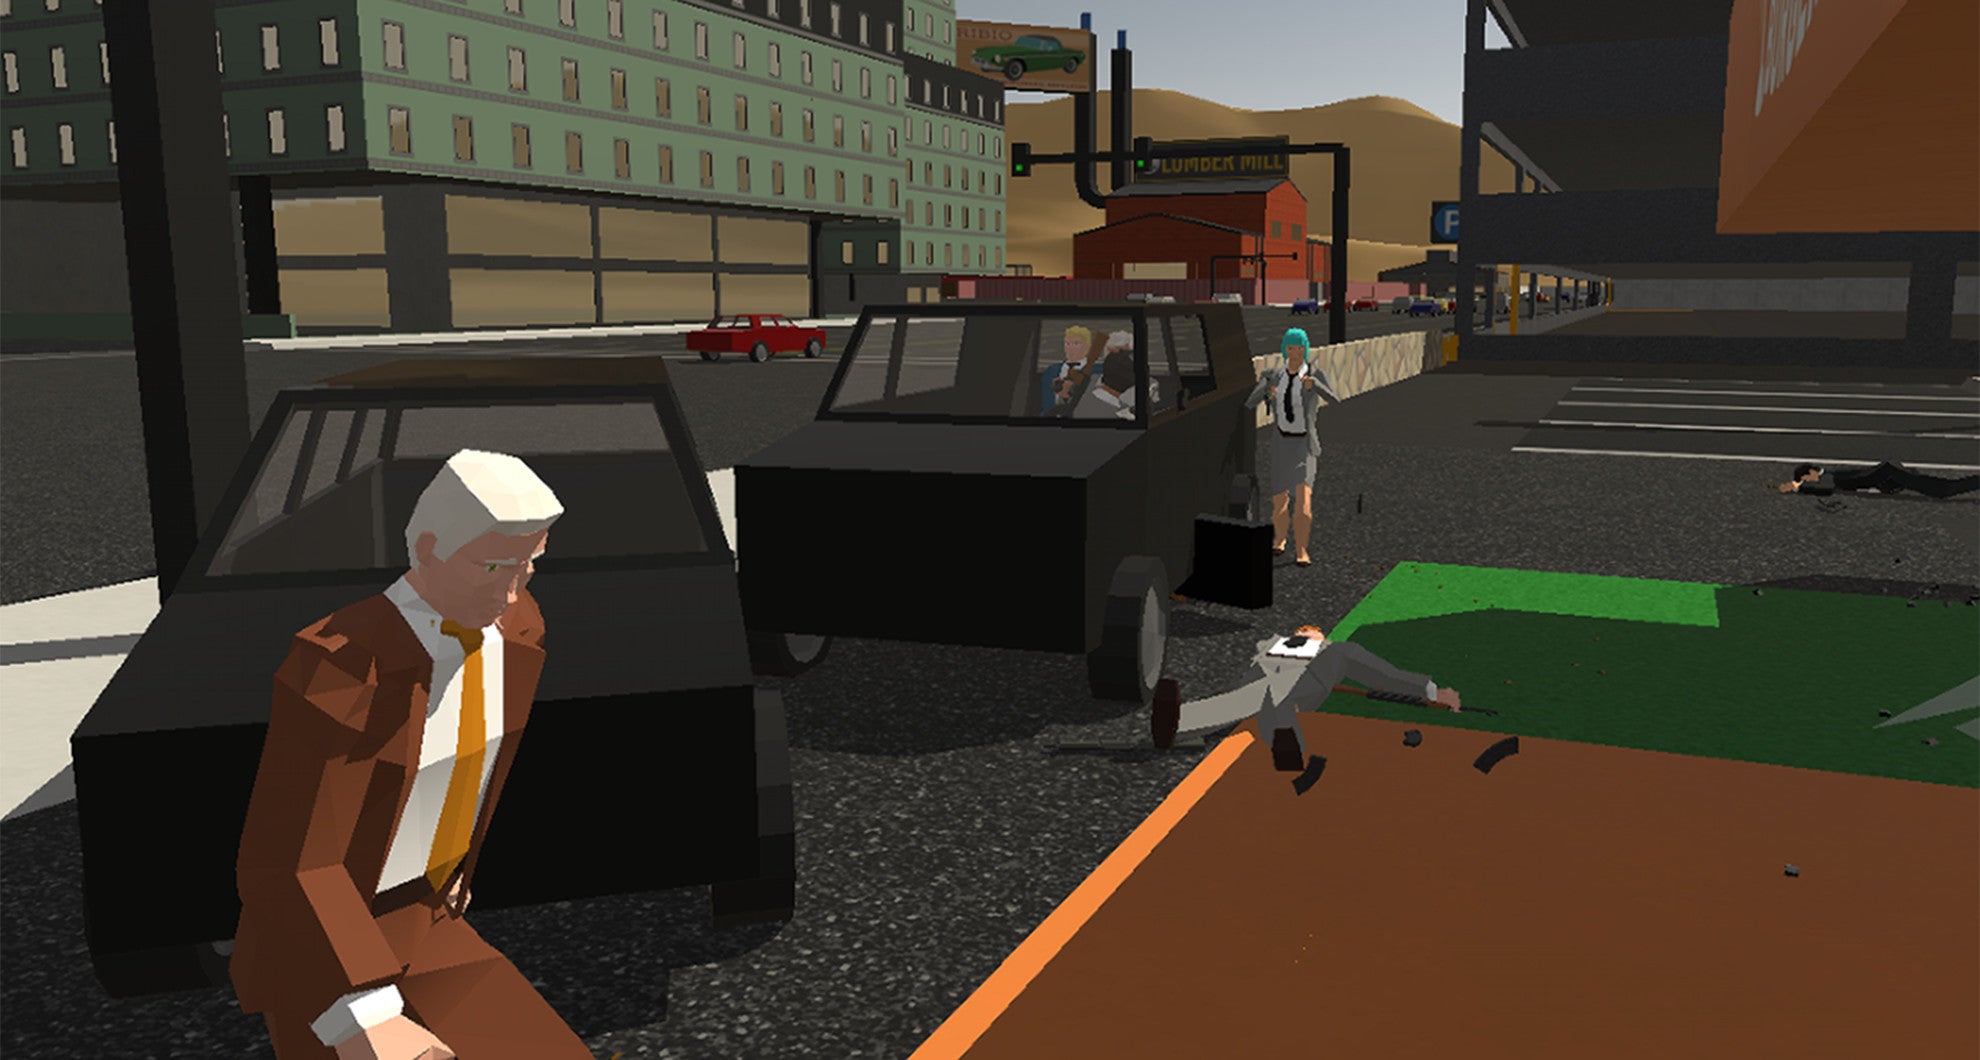 Sub Rosa is out (again?), On Steam Early Access this time